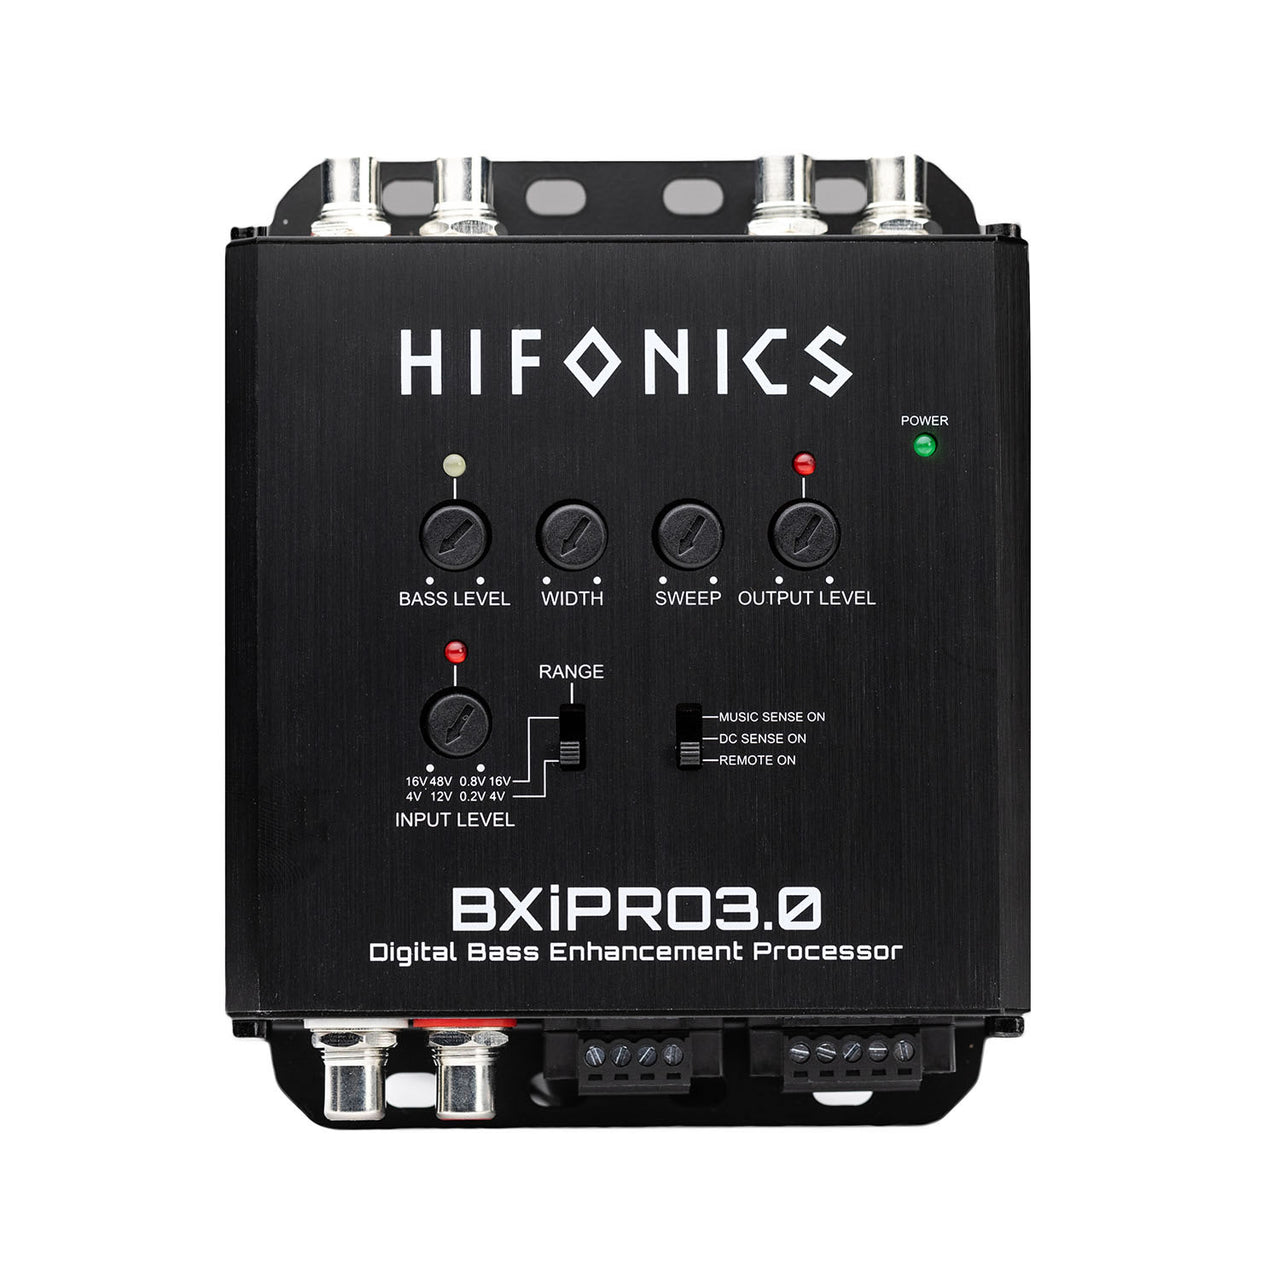 Hifonics BXIPRO1.5 Bass Enhancer Processor with Dash Mount Remote Control